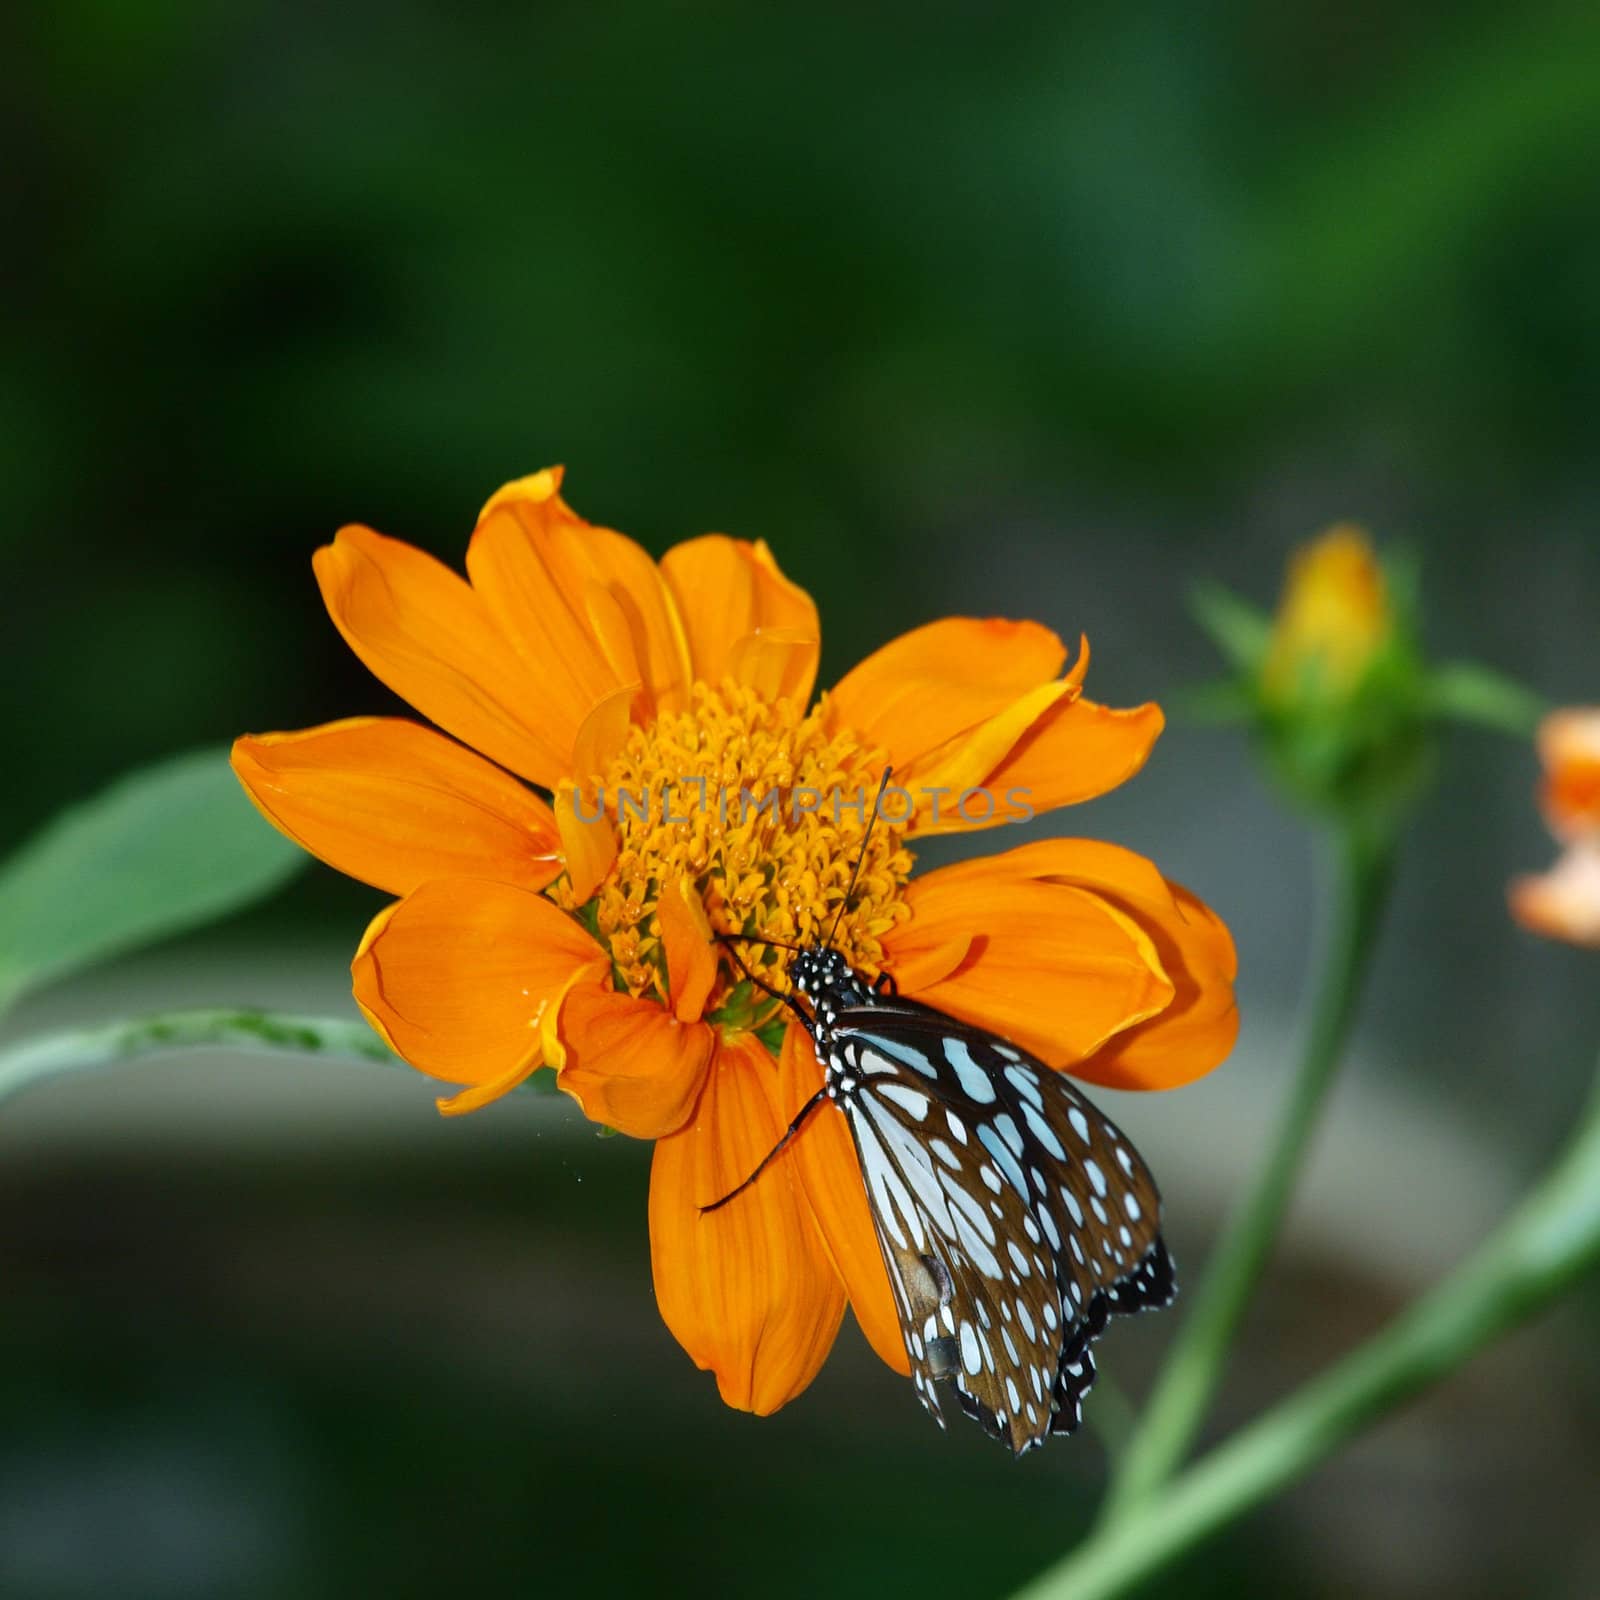 Butterfly on a Mexican Sunflower by jakgree